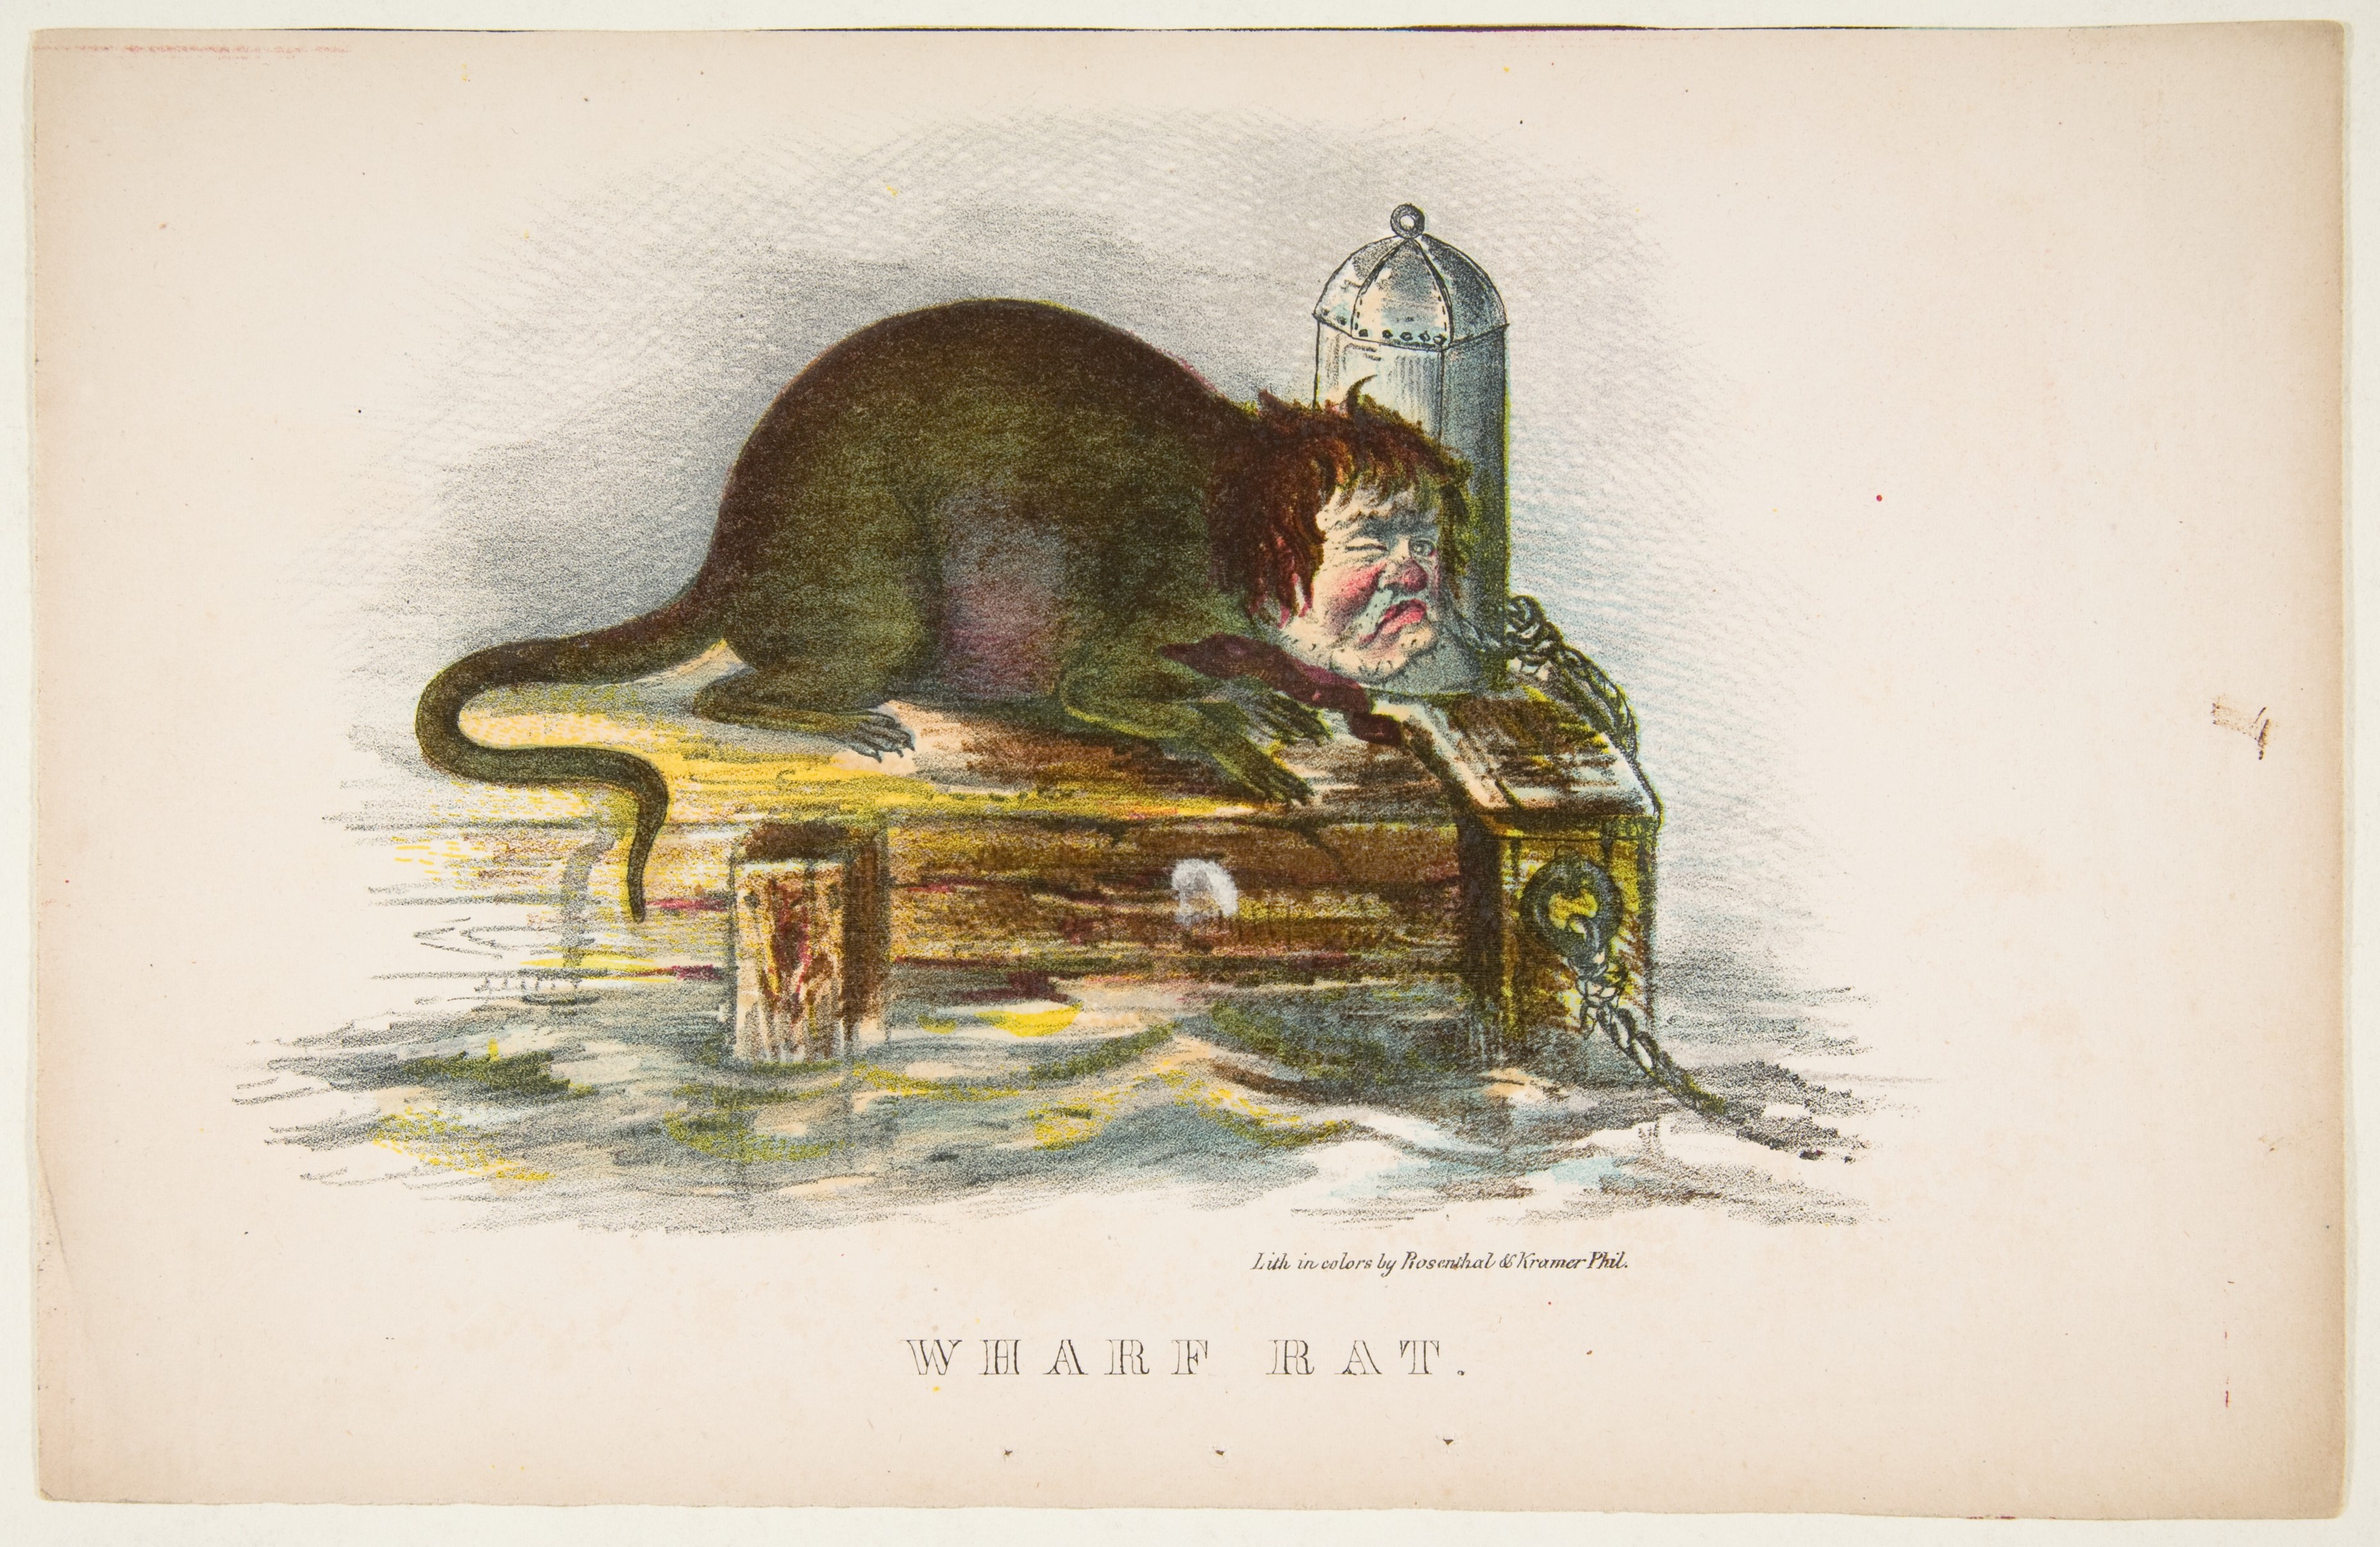 Henry Louis Stephens | Wharf Rat, from The Comic Natural History of the  Human Race | The Metropolitan Museum of Art